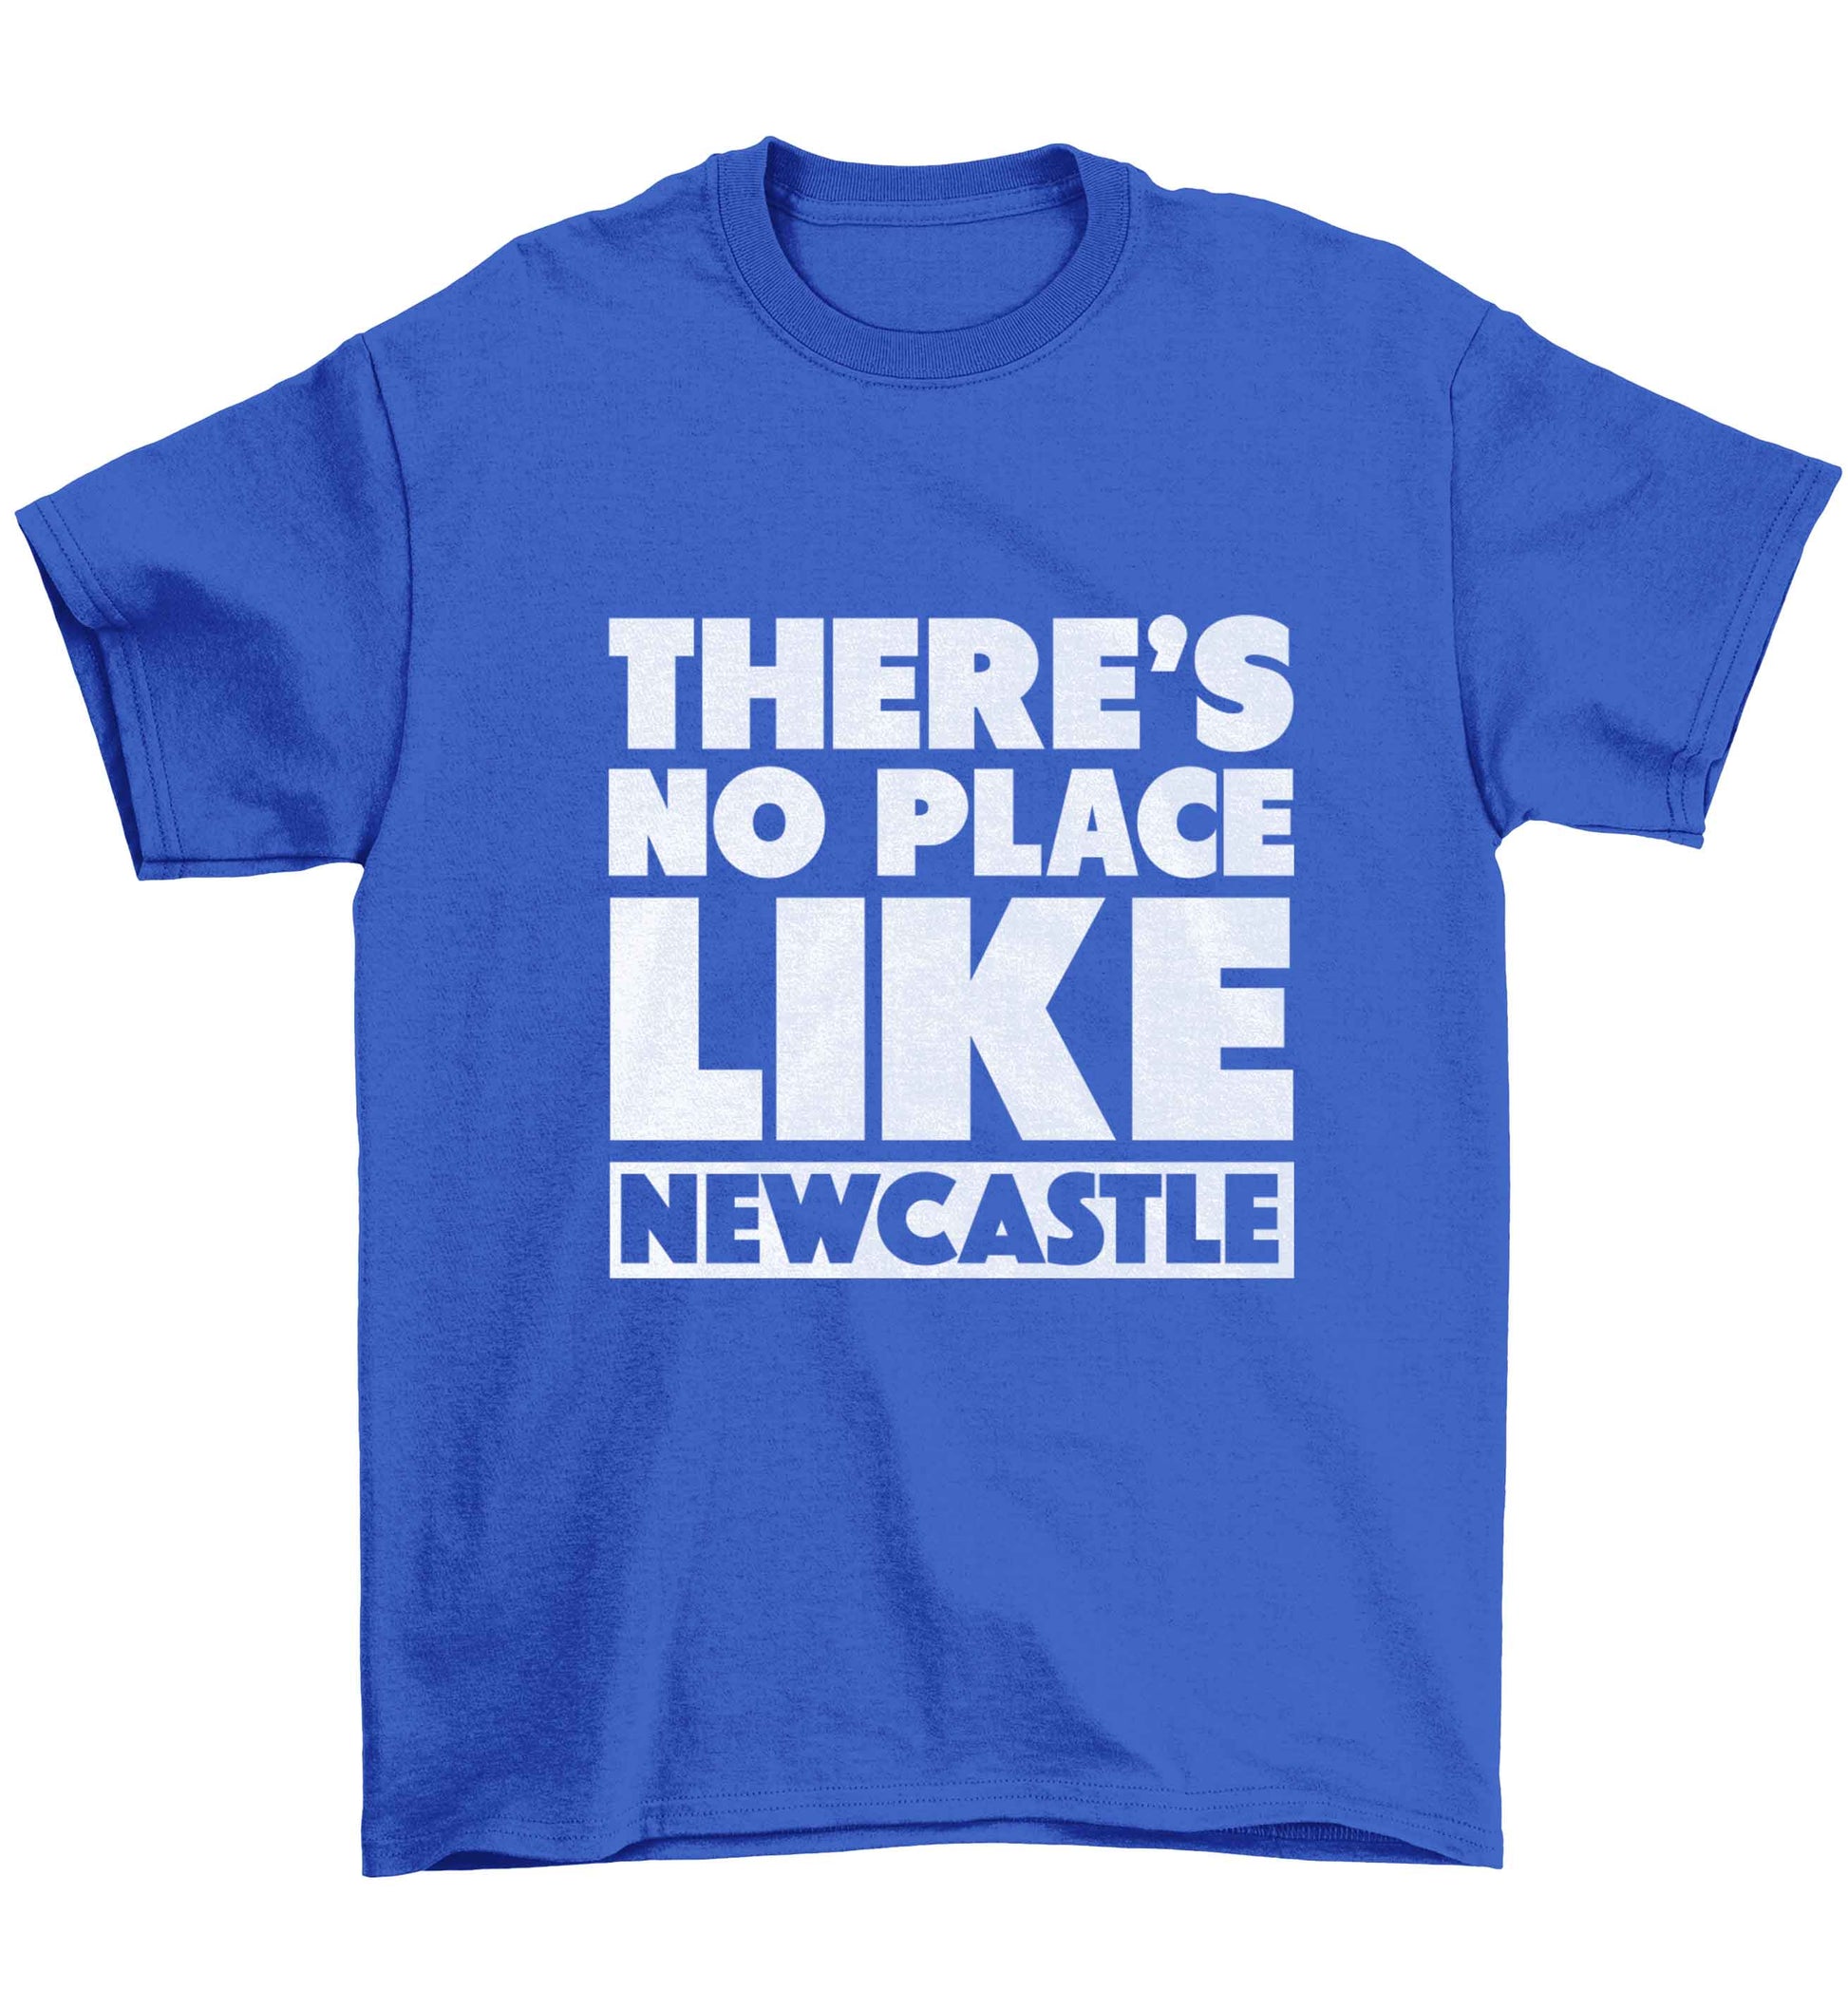 There's no place like Newcastle Children's blue Tshirt 12-13 Years